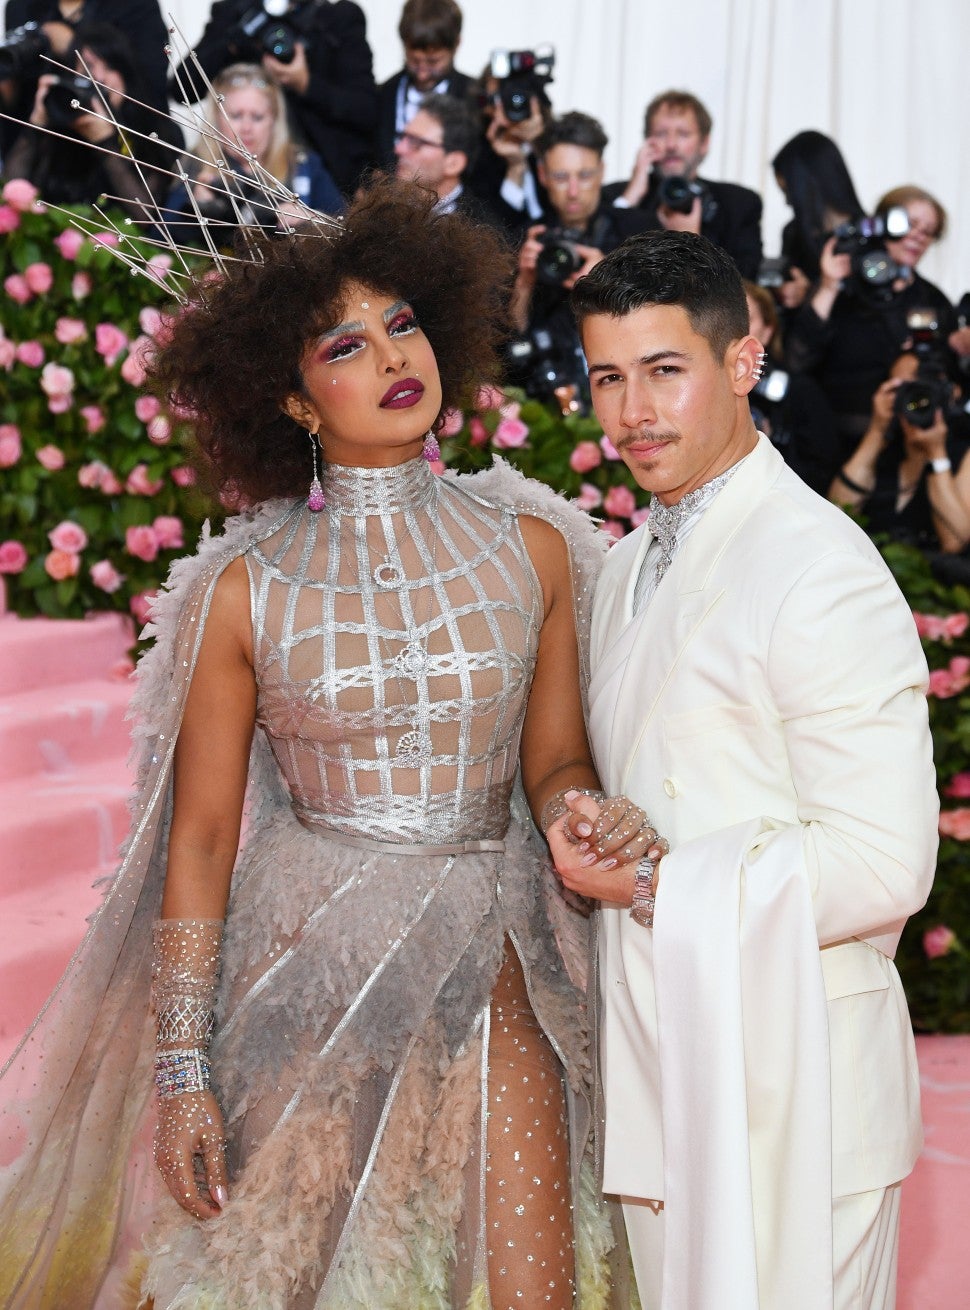 Met Gala 2019 All of the Campiest Outfits, Biggest Entrances and Most